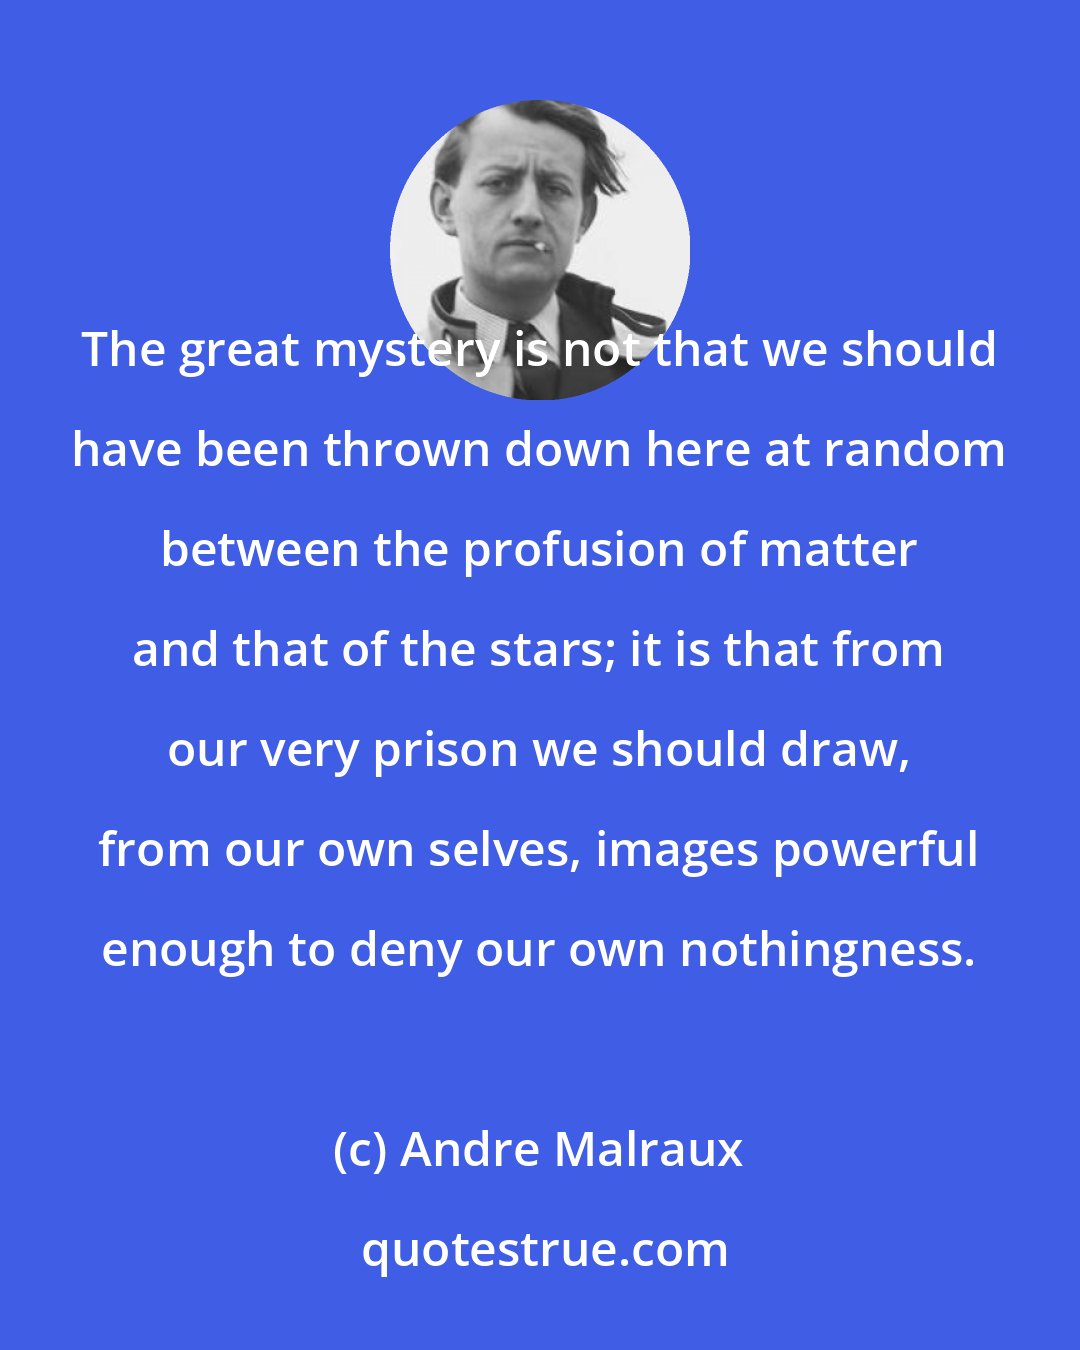 Andre Malraux: The great mystery is not that we should have been thrown down here at random between the profusion of matter and that of the stars; it is that from our very prison we should draw, from our own selves, images powerful enough to deny our own nothingness.